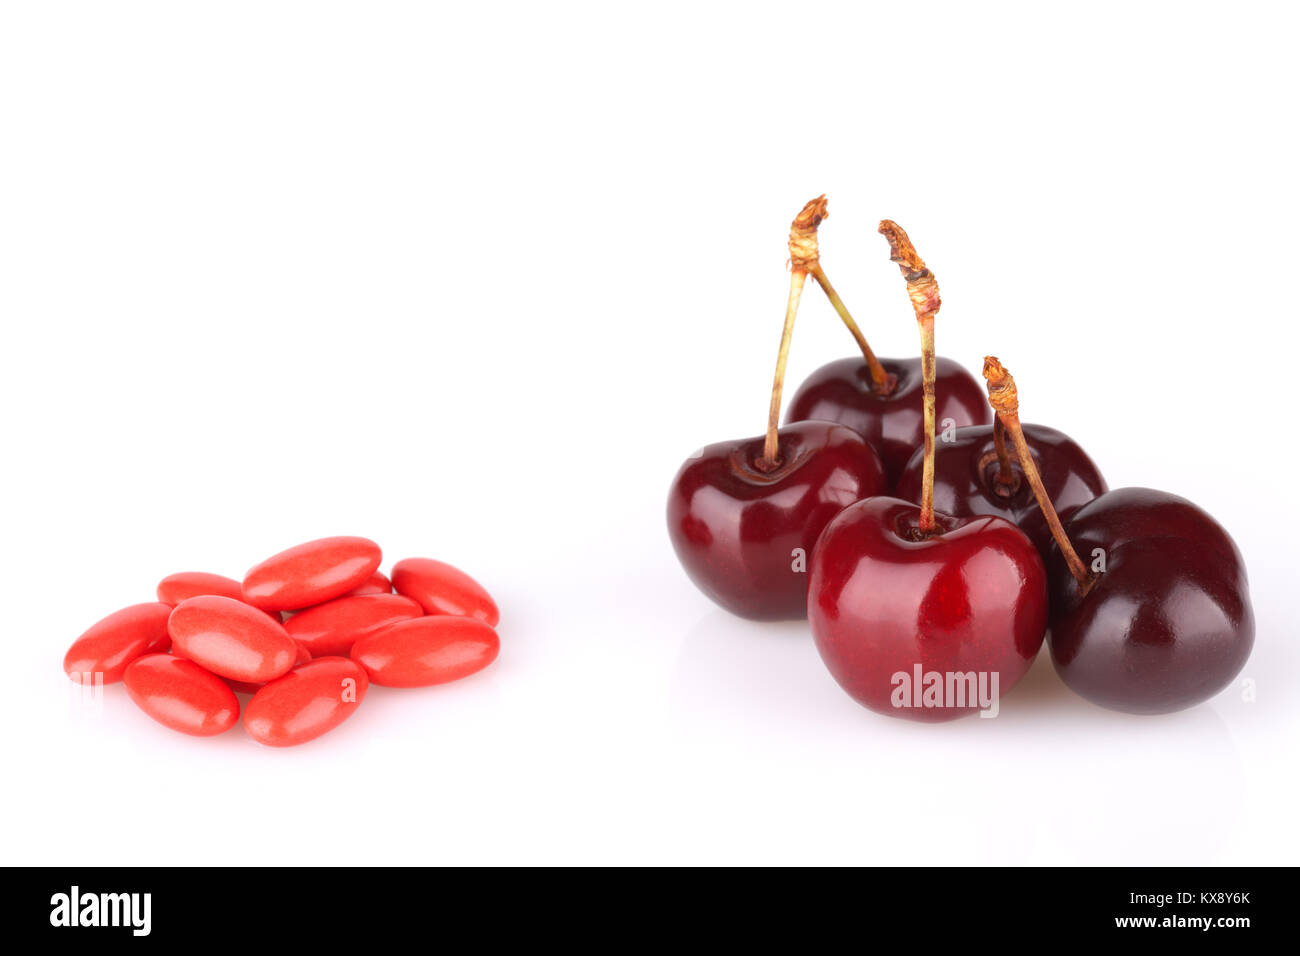 Fruits or drugs are better? Fresh cherry and medicine pills Stock Photo